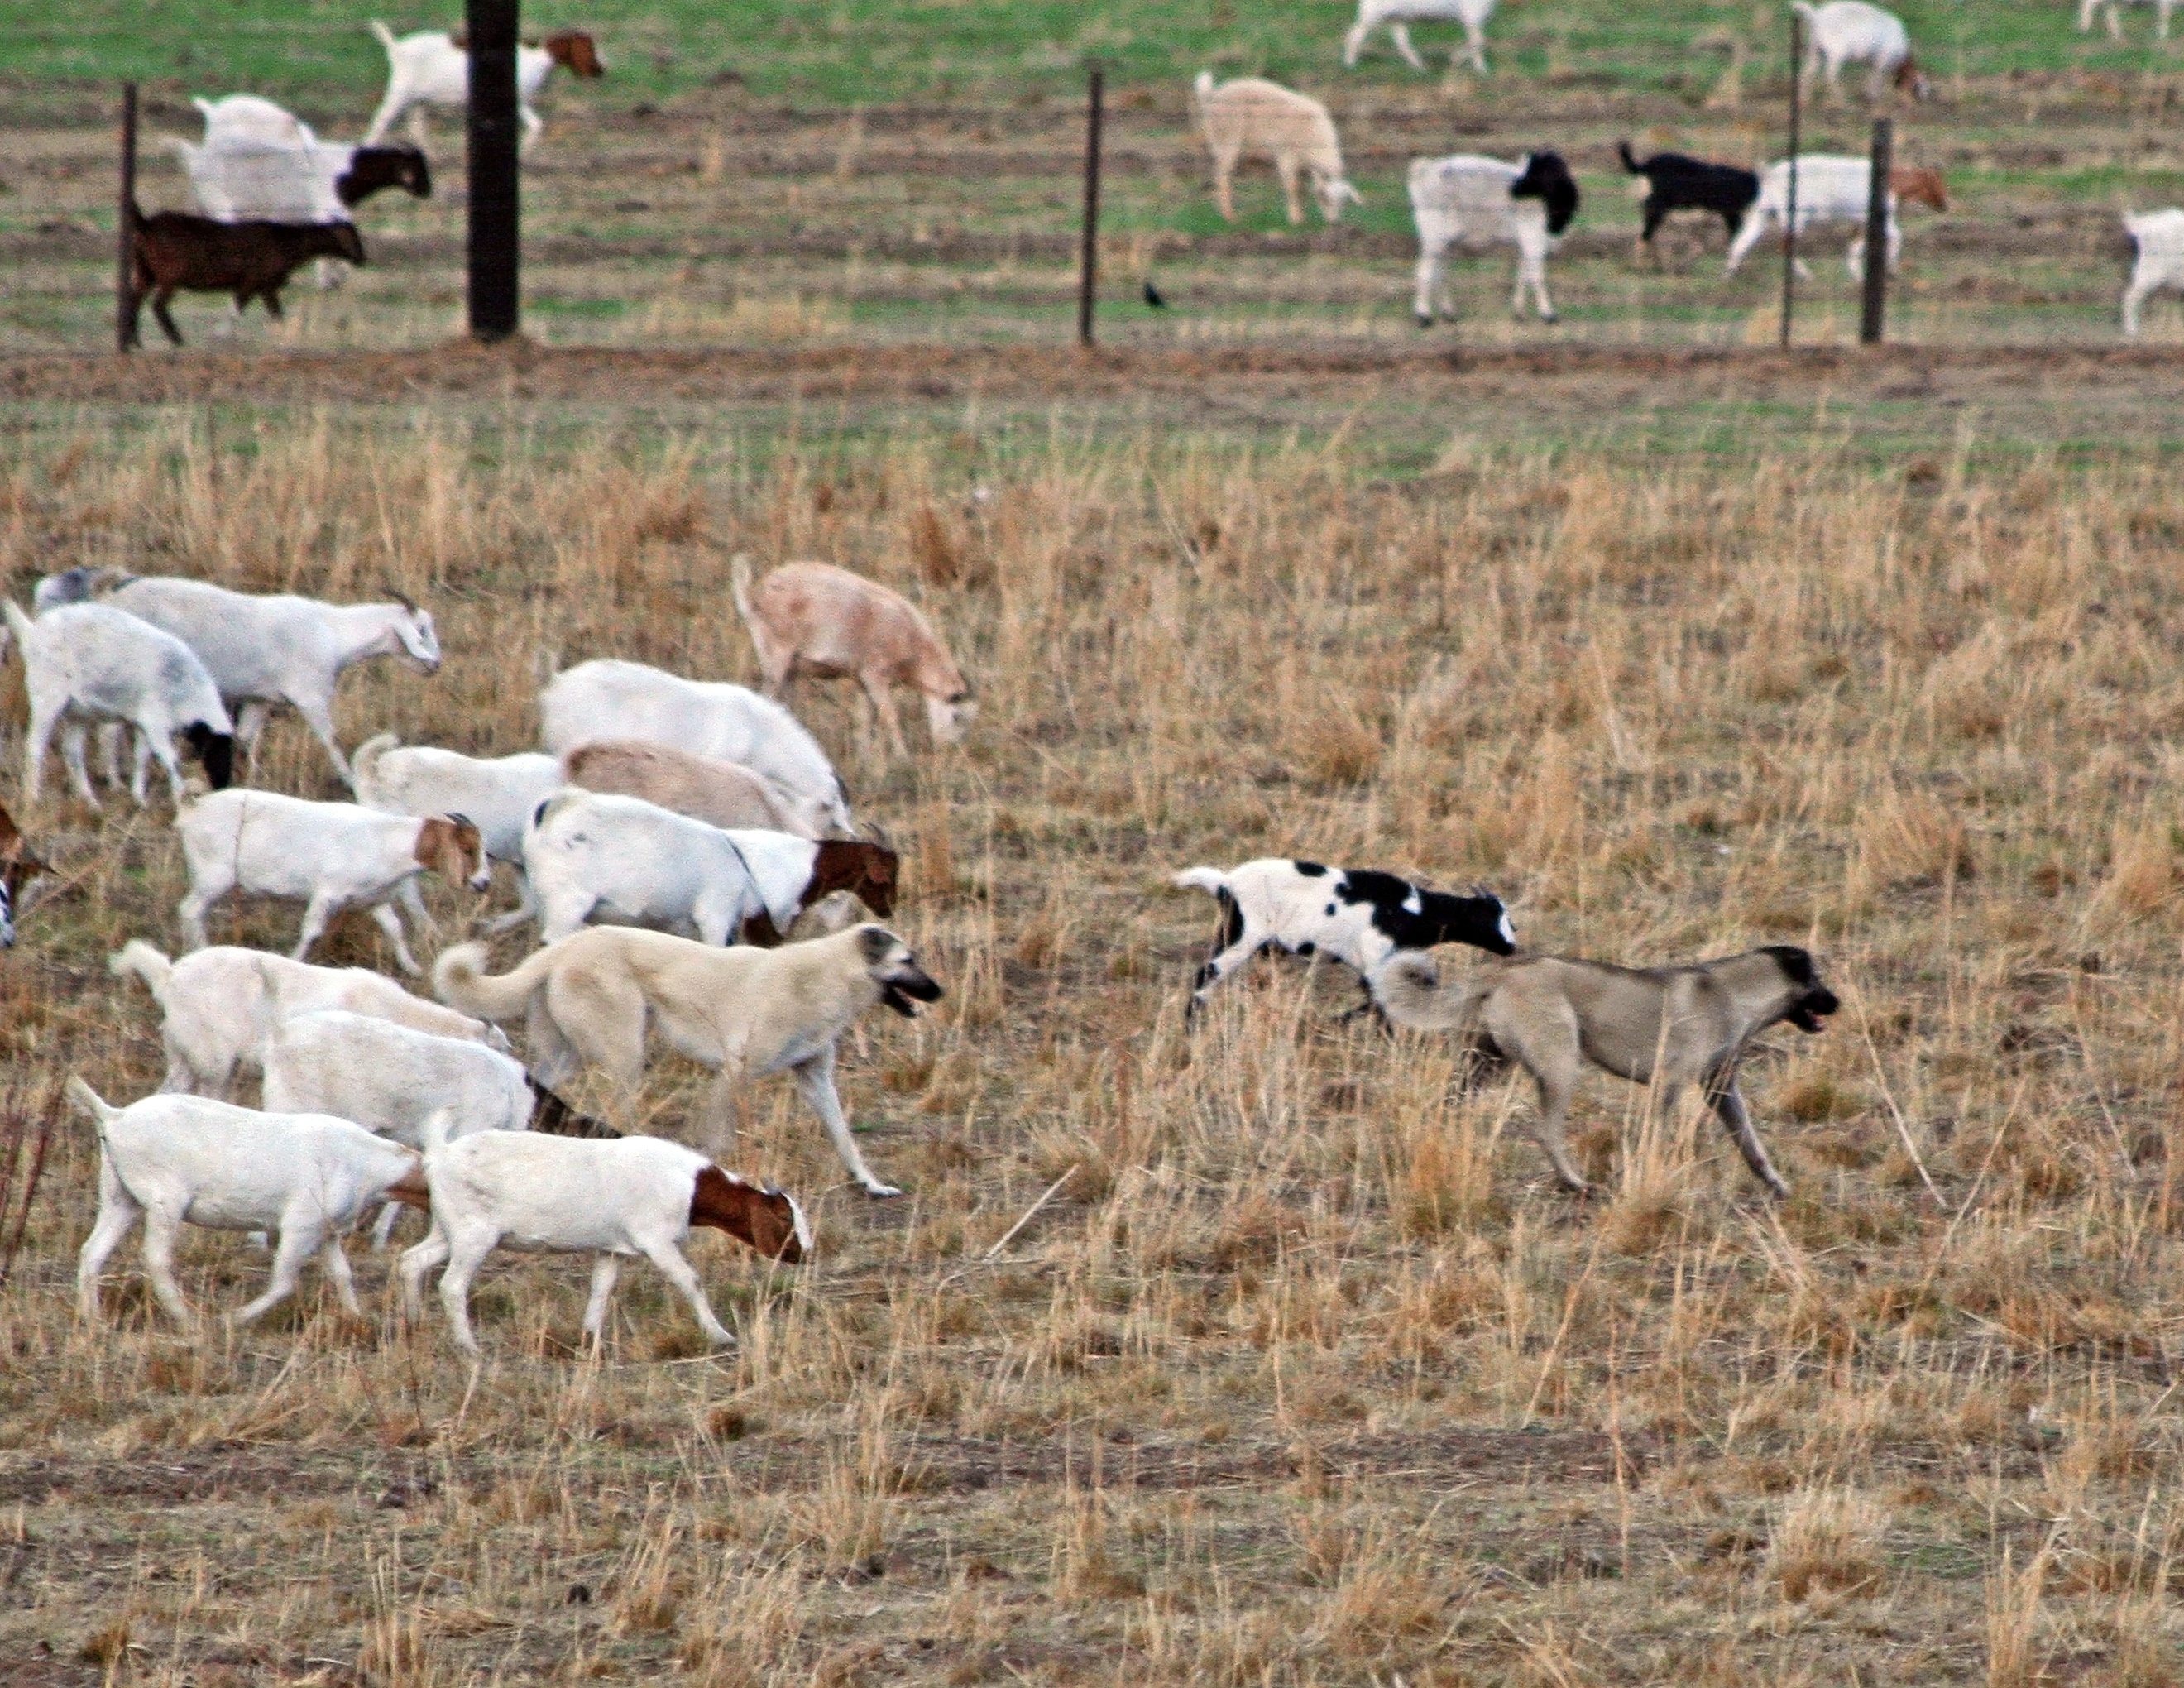 Goats and dogs in a field